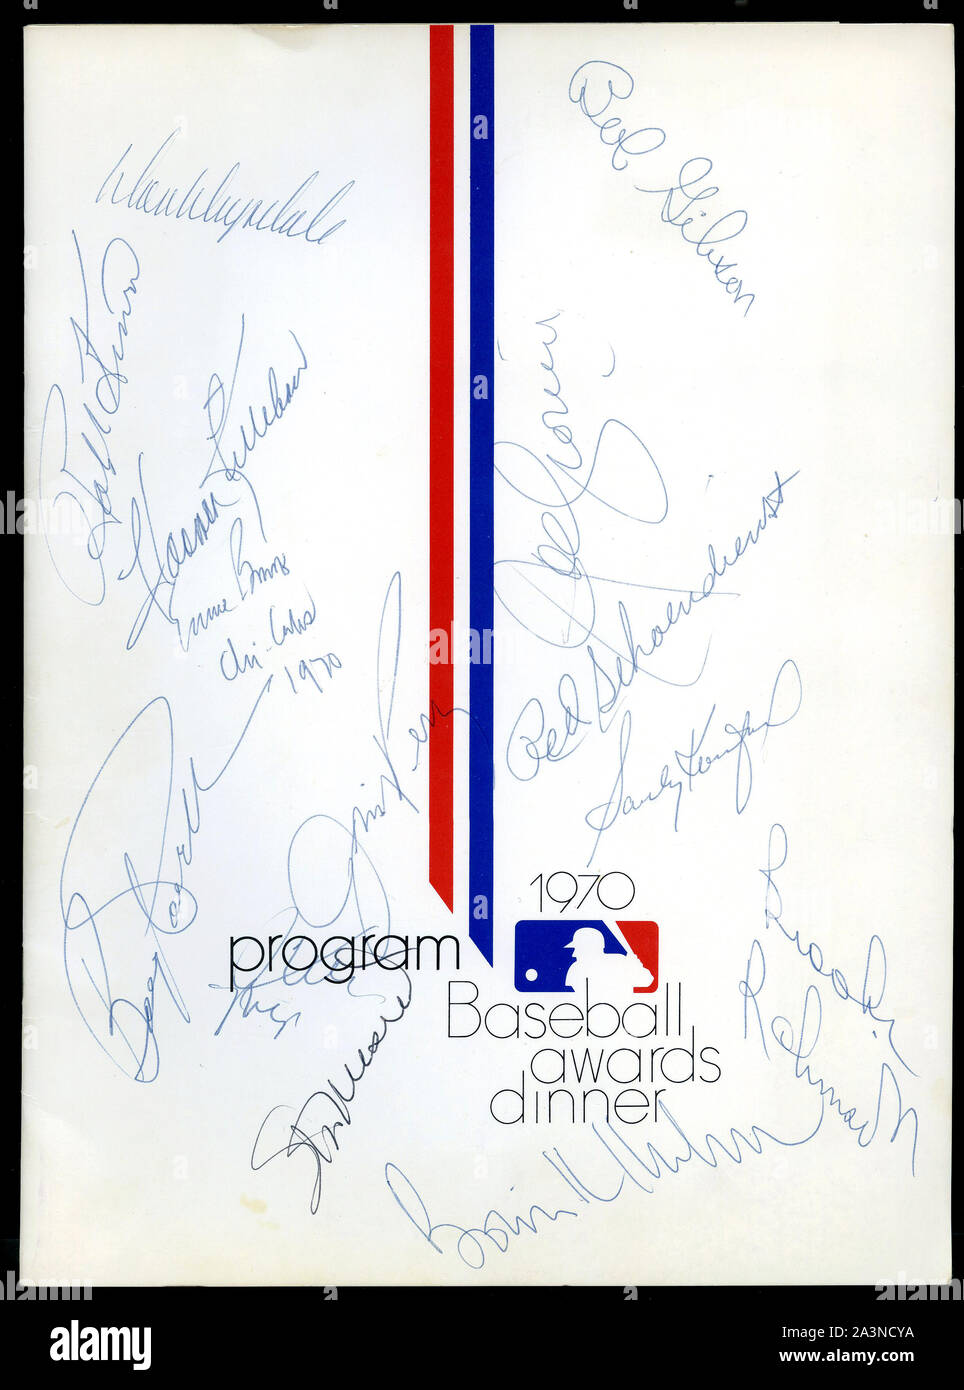 1970 Baseball Awards Dinner program cover autographed by iconic Hall of Fame players such as Sandy Koufax, Ernie Banks and Stan Musial. Stock Photo